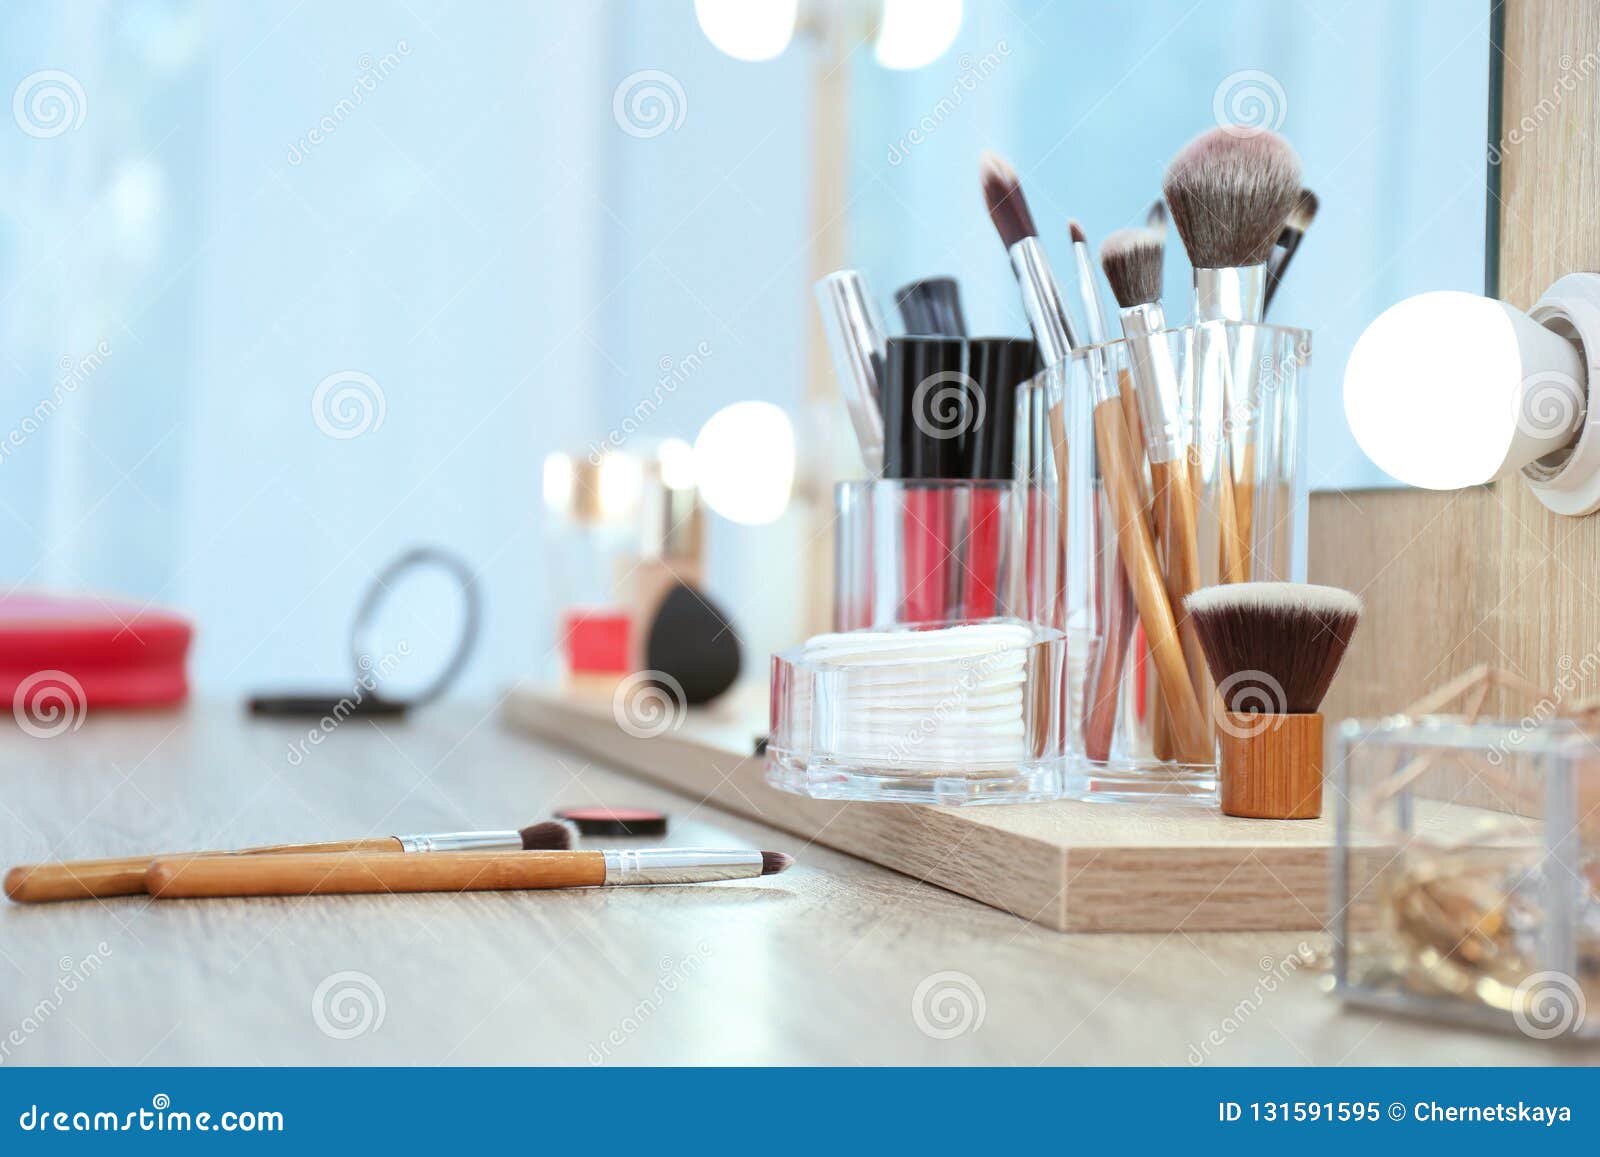 Organizer With Cosmetic Products For Makeup On Table Near Mirror